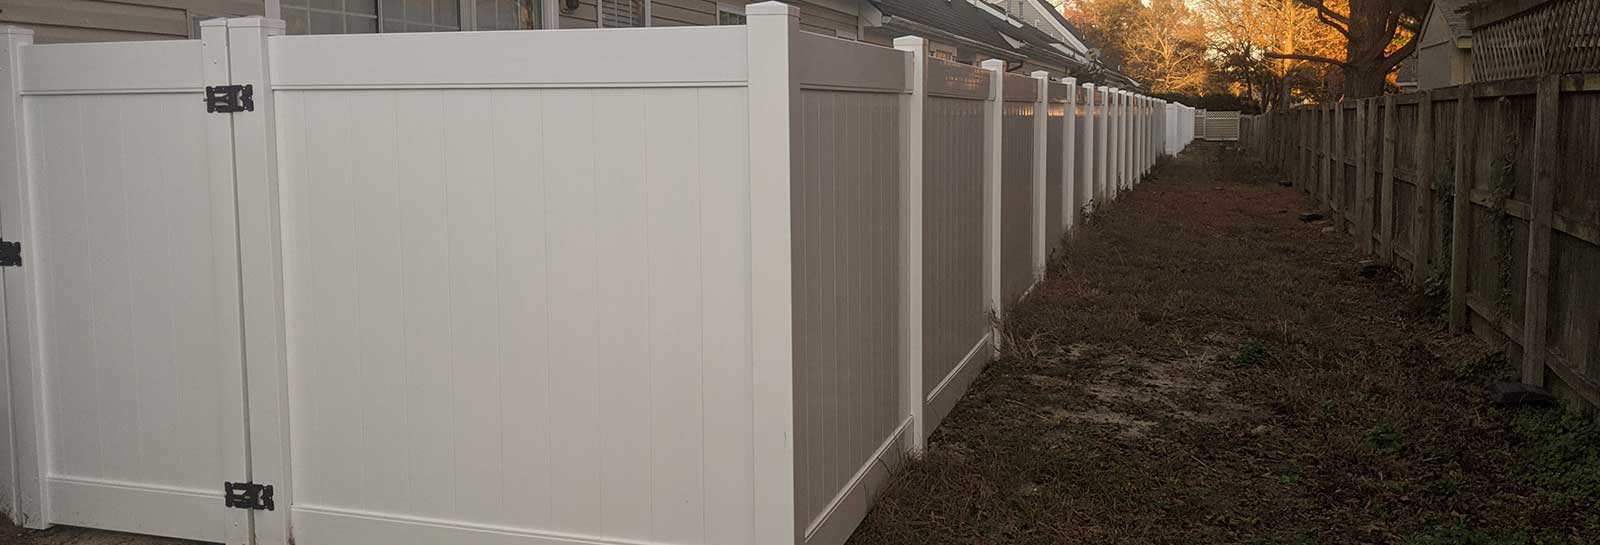 residential or commercial vinyl privacy fence installation